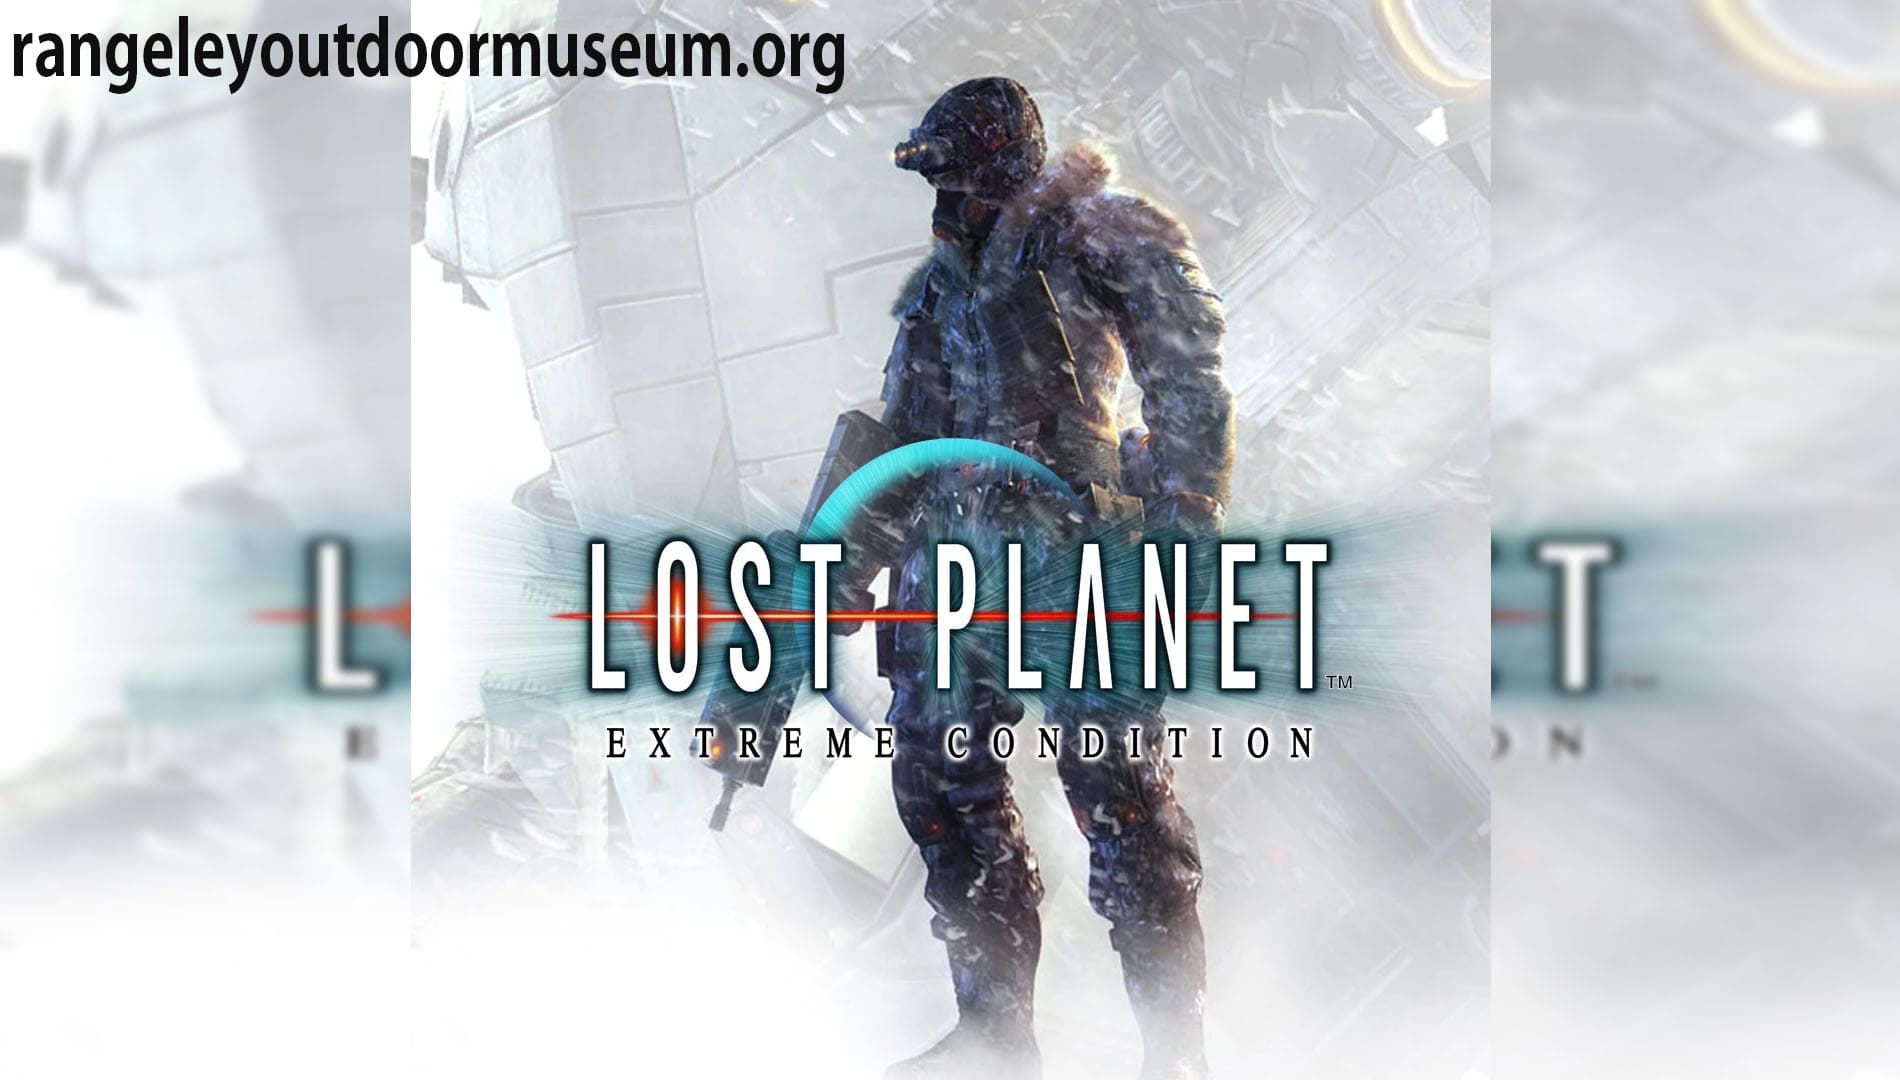 Lost Planet